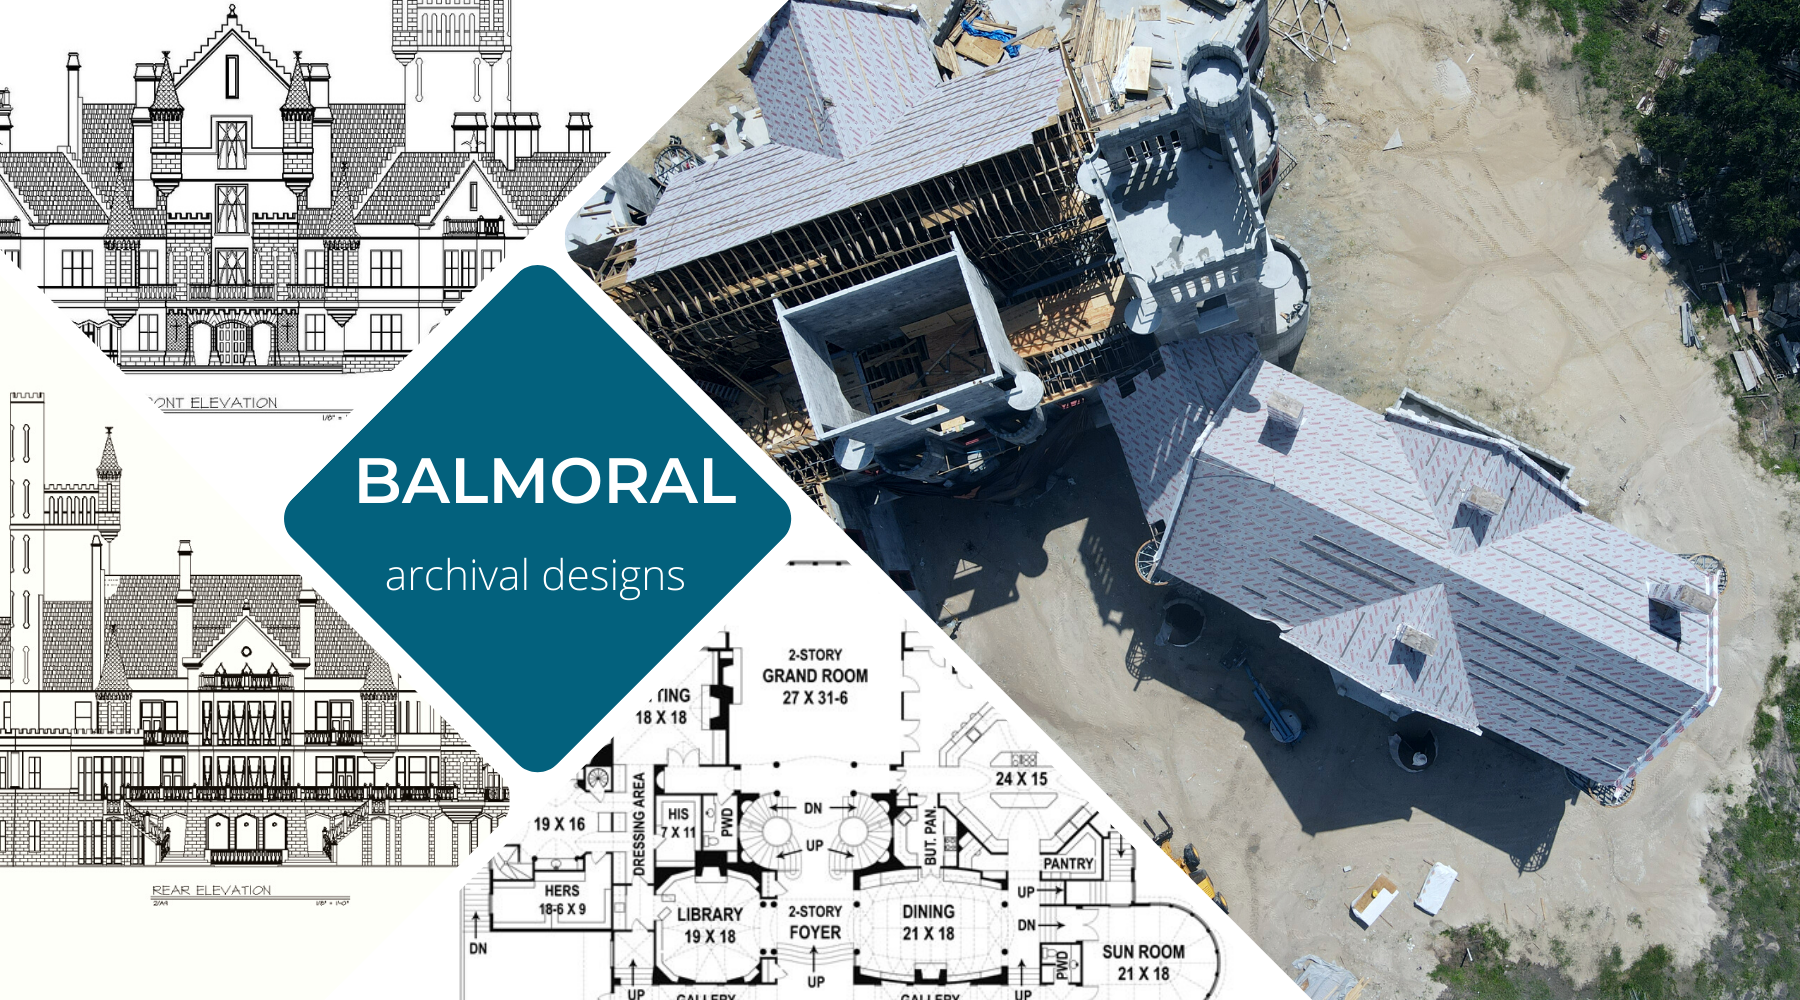 The Balmoral by Archival Designs: making progress in 2022